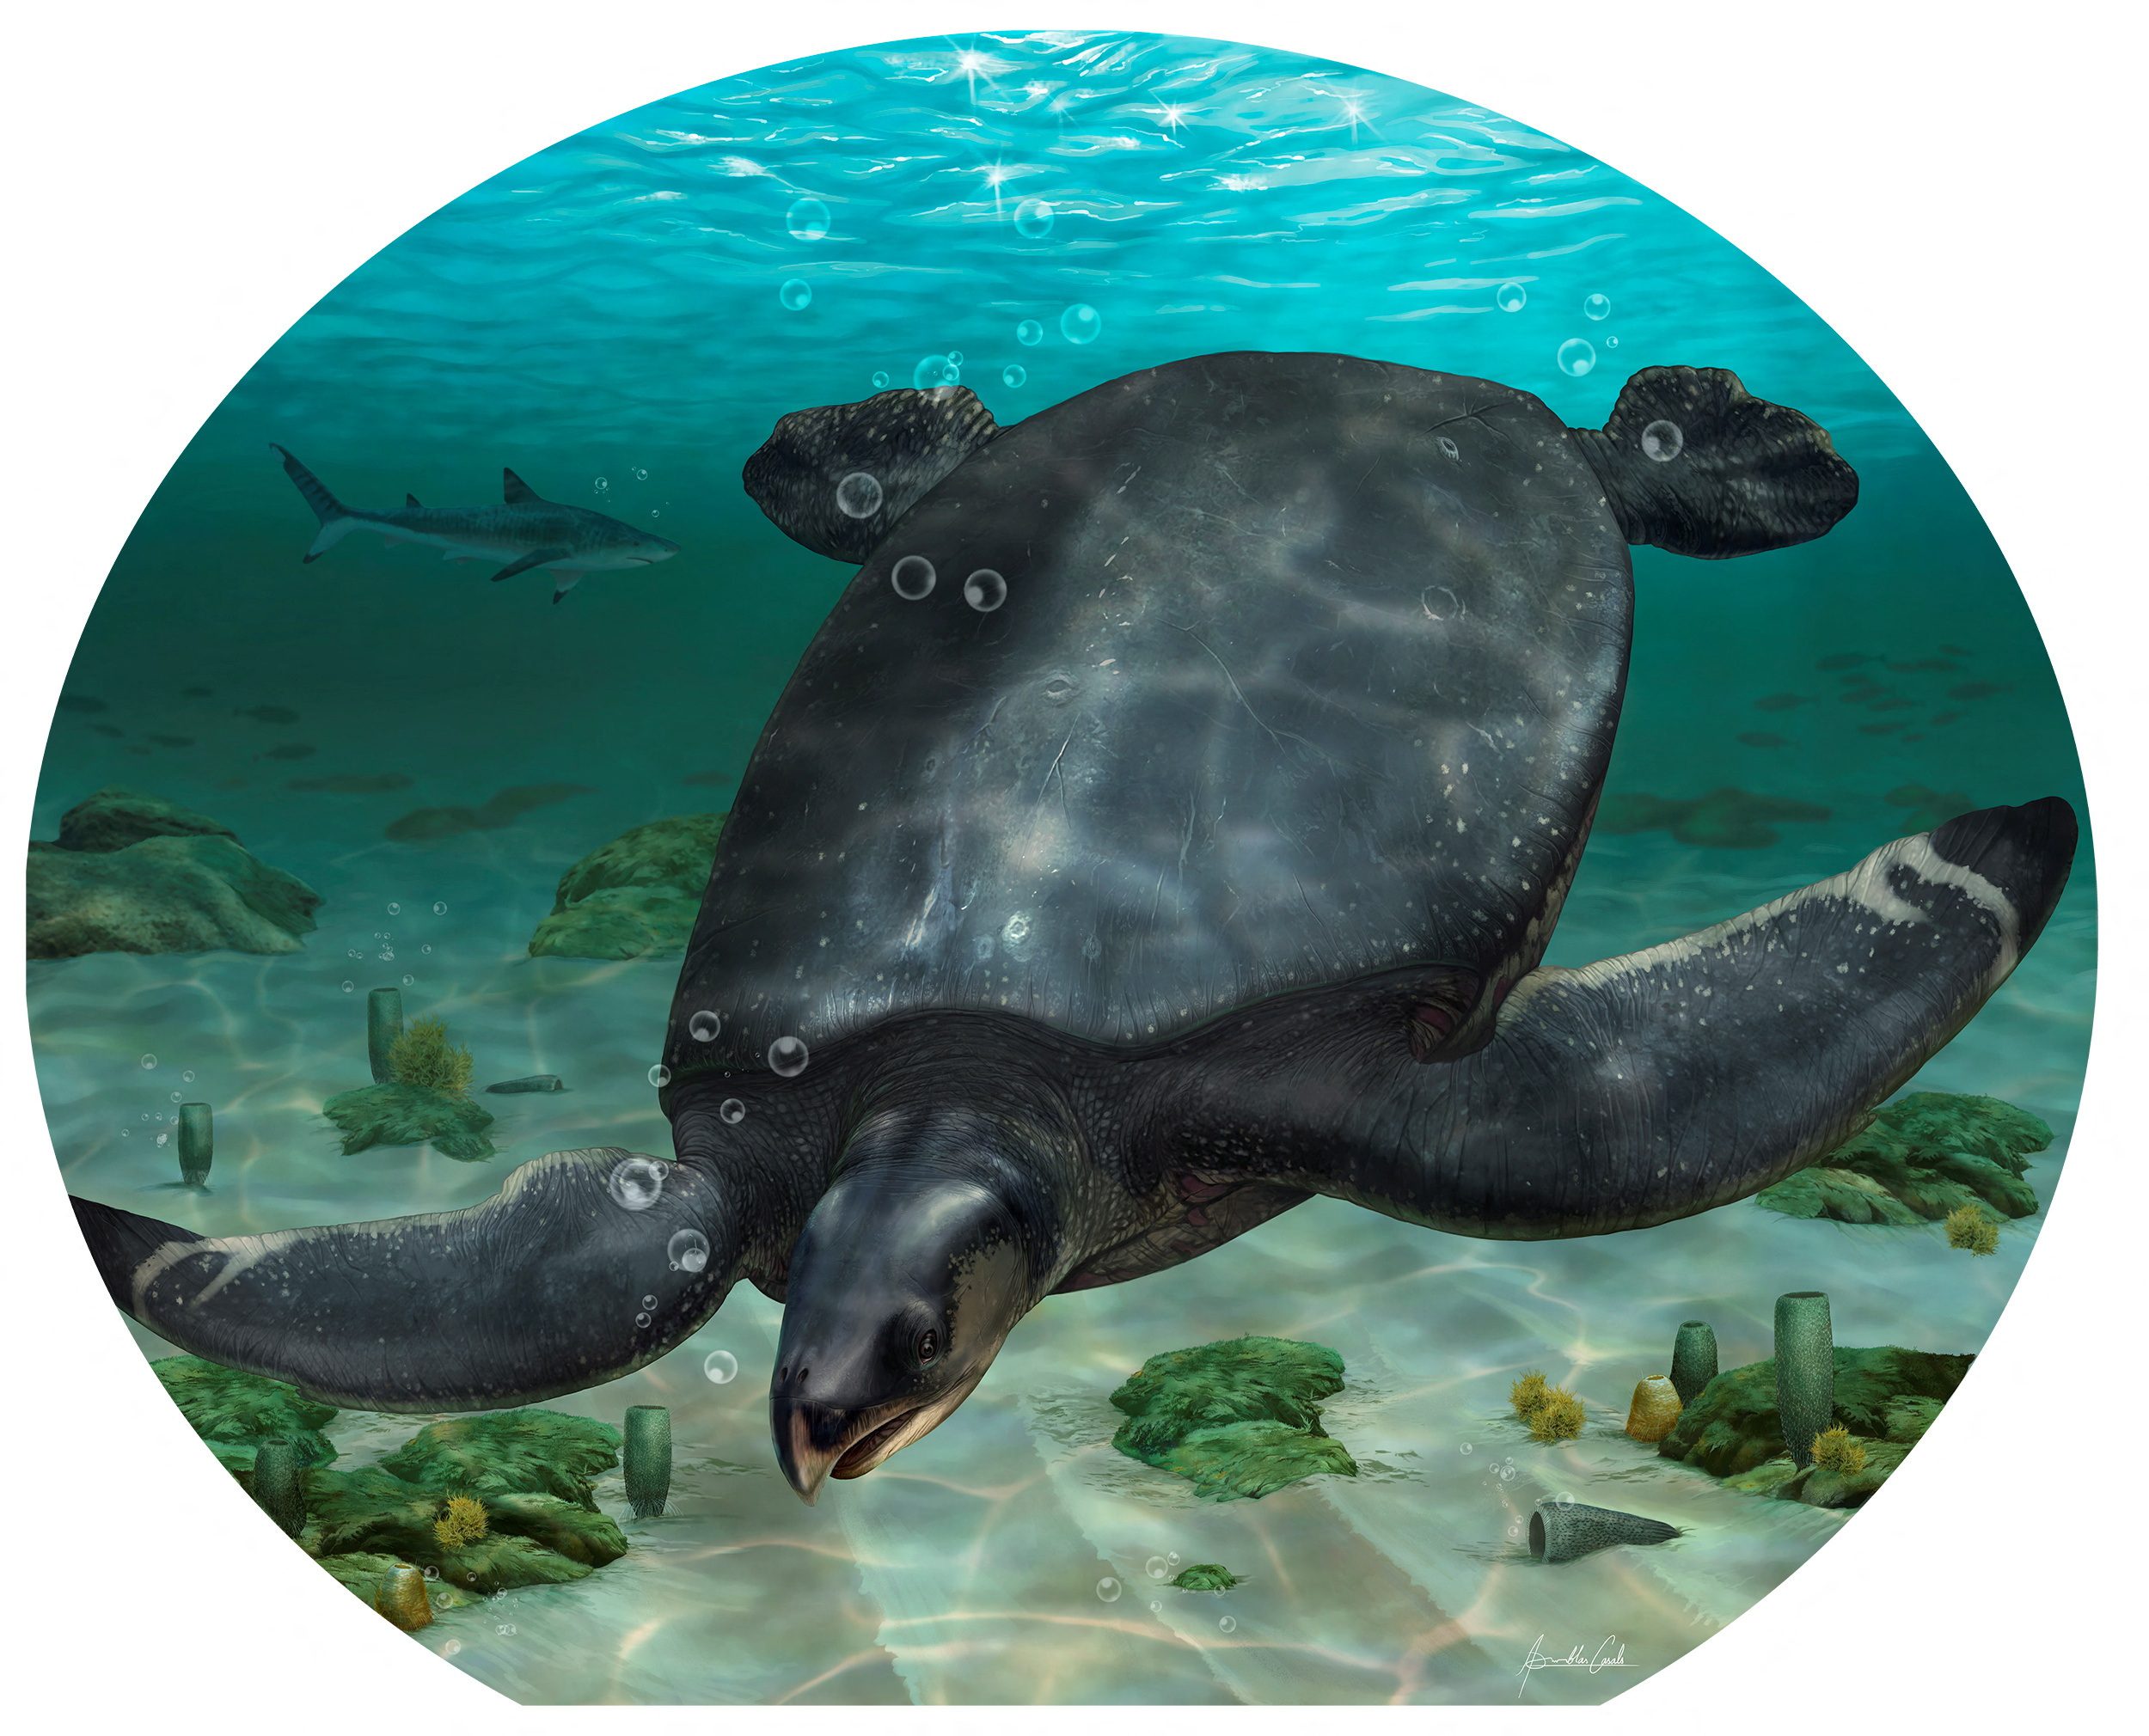 Illustrated reconstruction of the large Cretaceous sea turtle Leviathanochelys aenigmatica, which lived about 83 million years ago and whose fossils were found in the Catalan region of Alt Urgell in northeastern Spain (REUTERS)